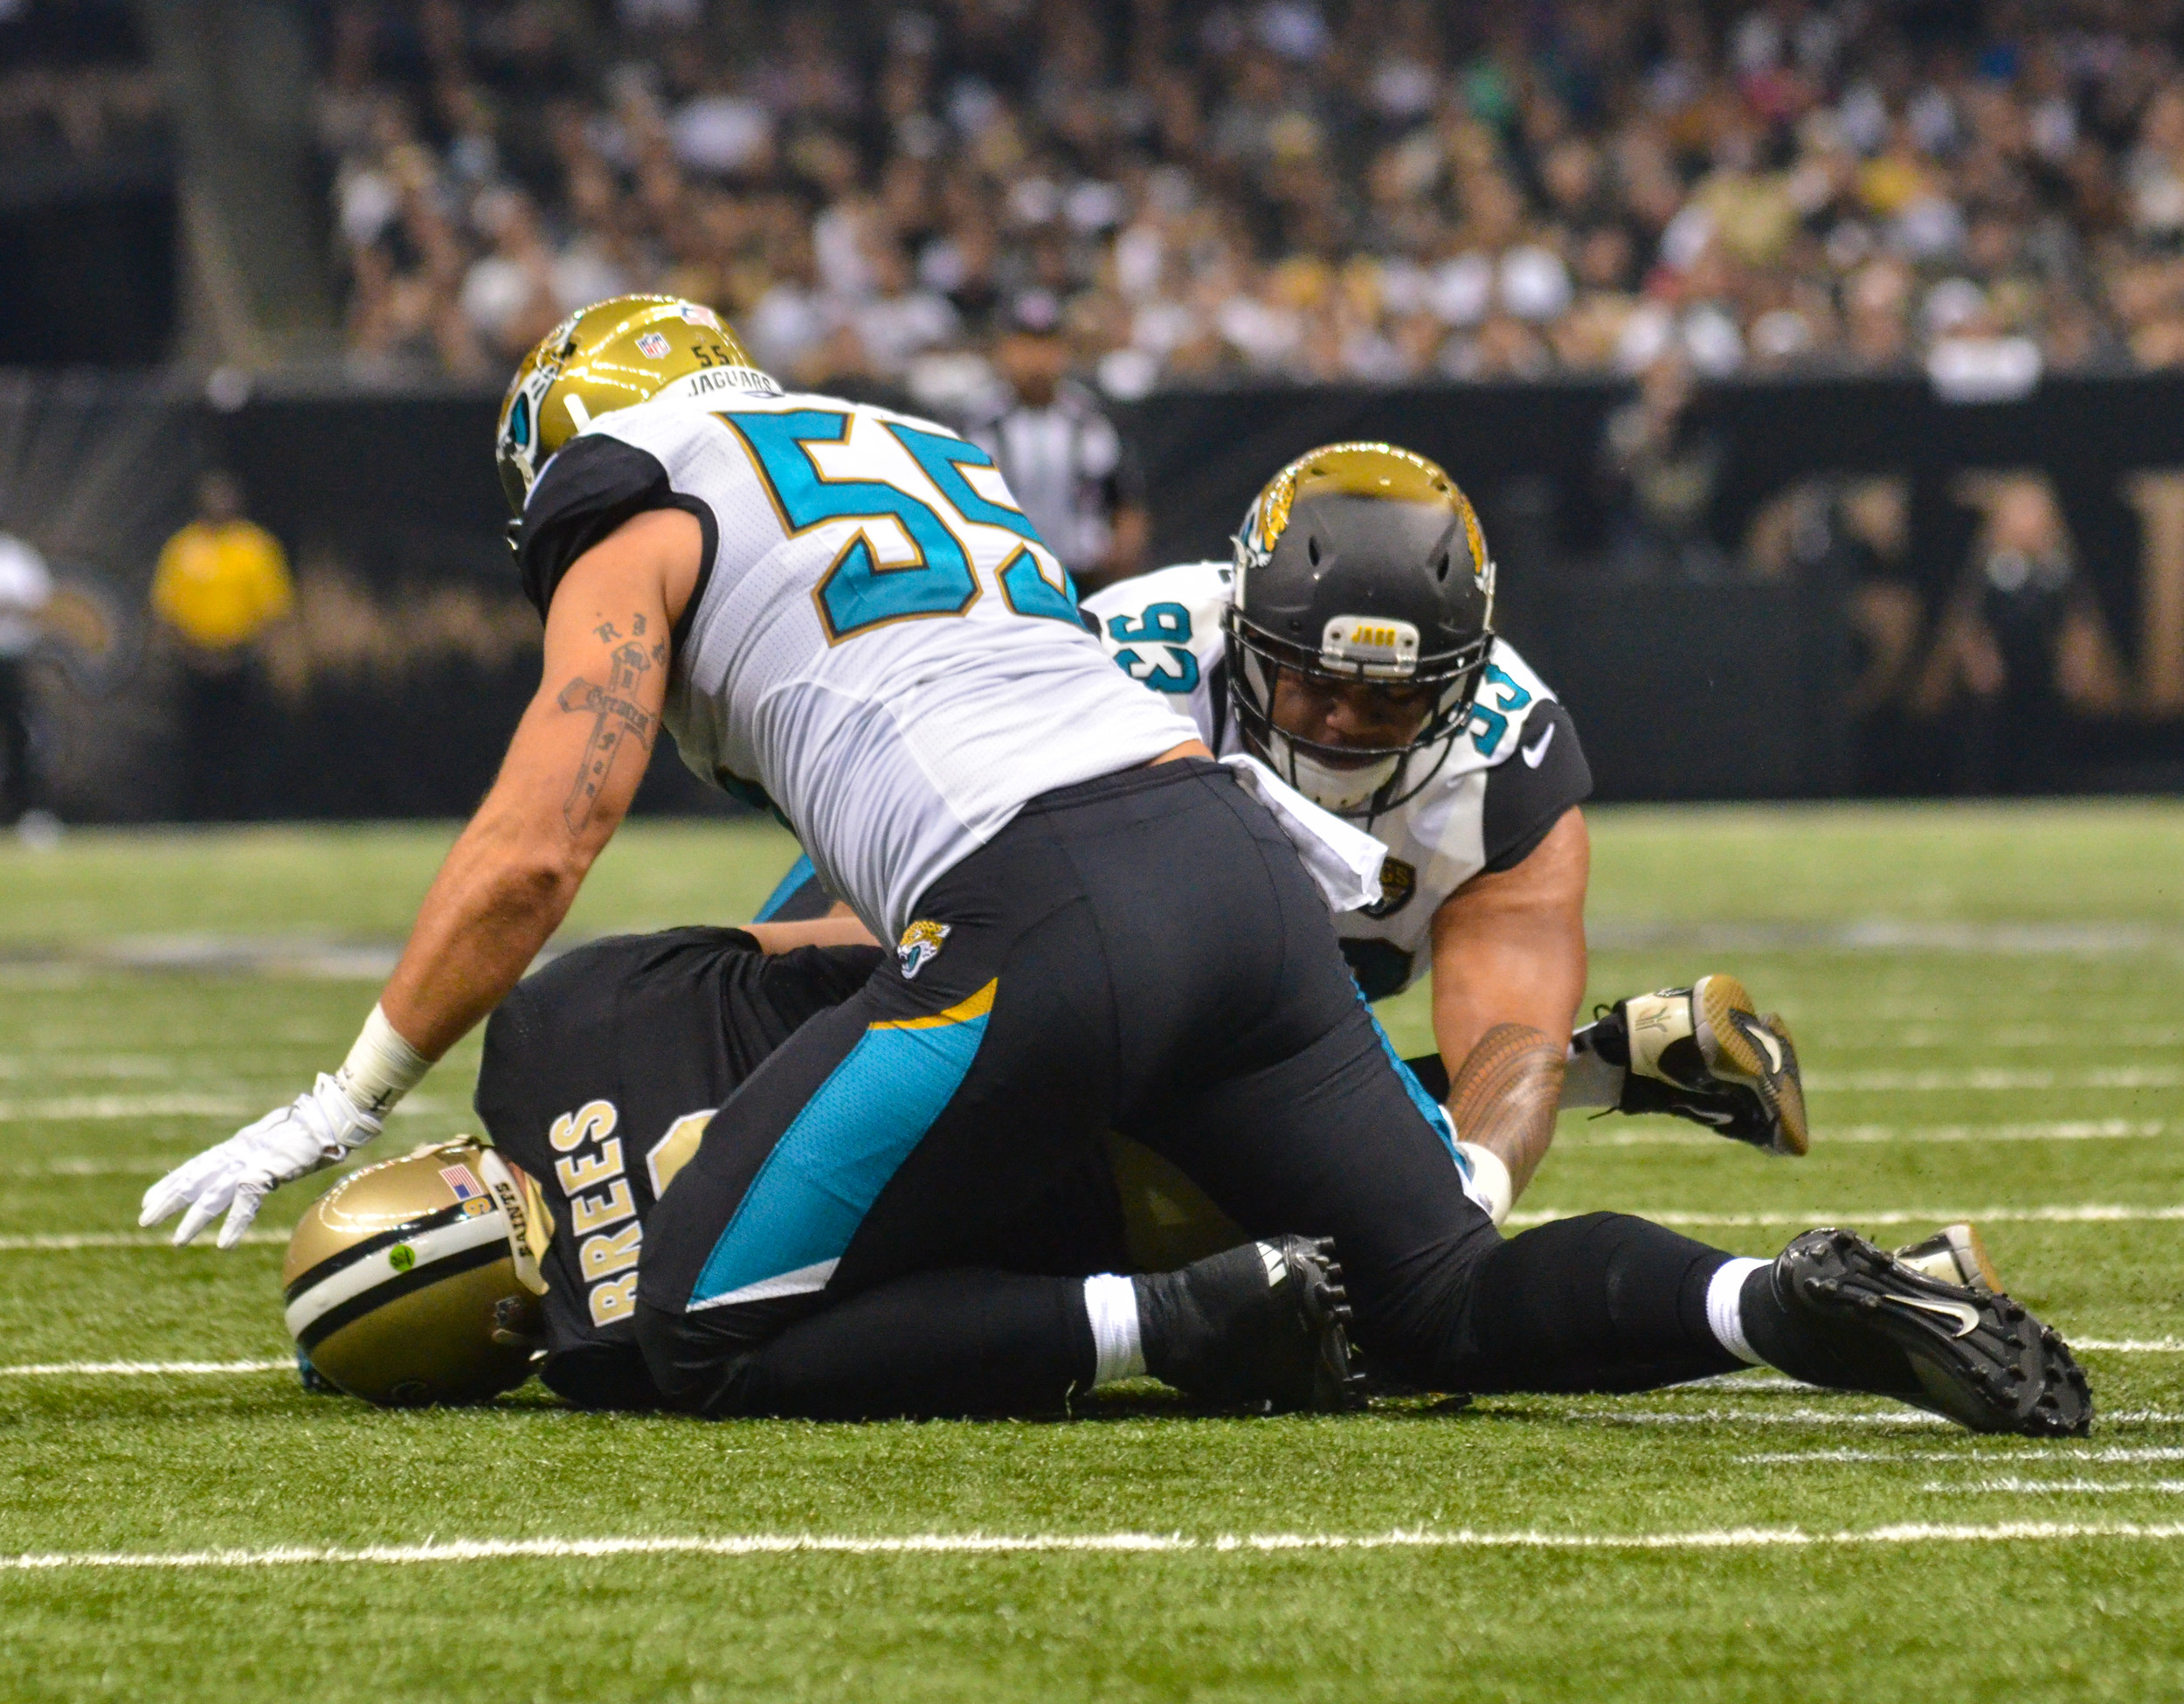 The Jaguars sacked Saints’ QB Drew Brees once in the 38-27 loss. Middle linebacker Paul Posluszny (51) got him for a 10-yard loss. The Saints finished with 537 total yards, the most allowed under third-year Jaguars coach Gus Bradley.